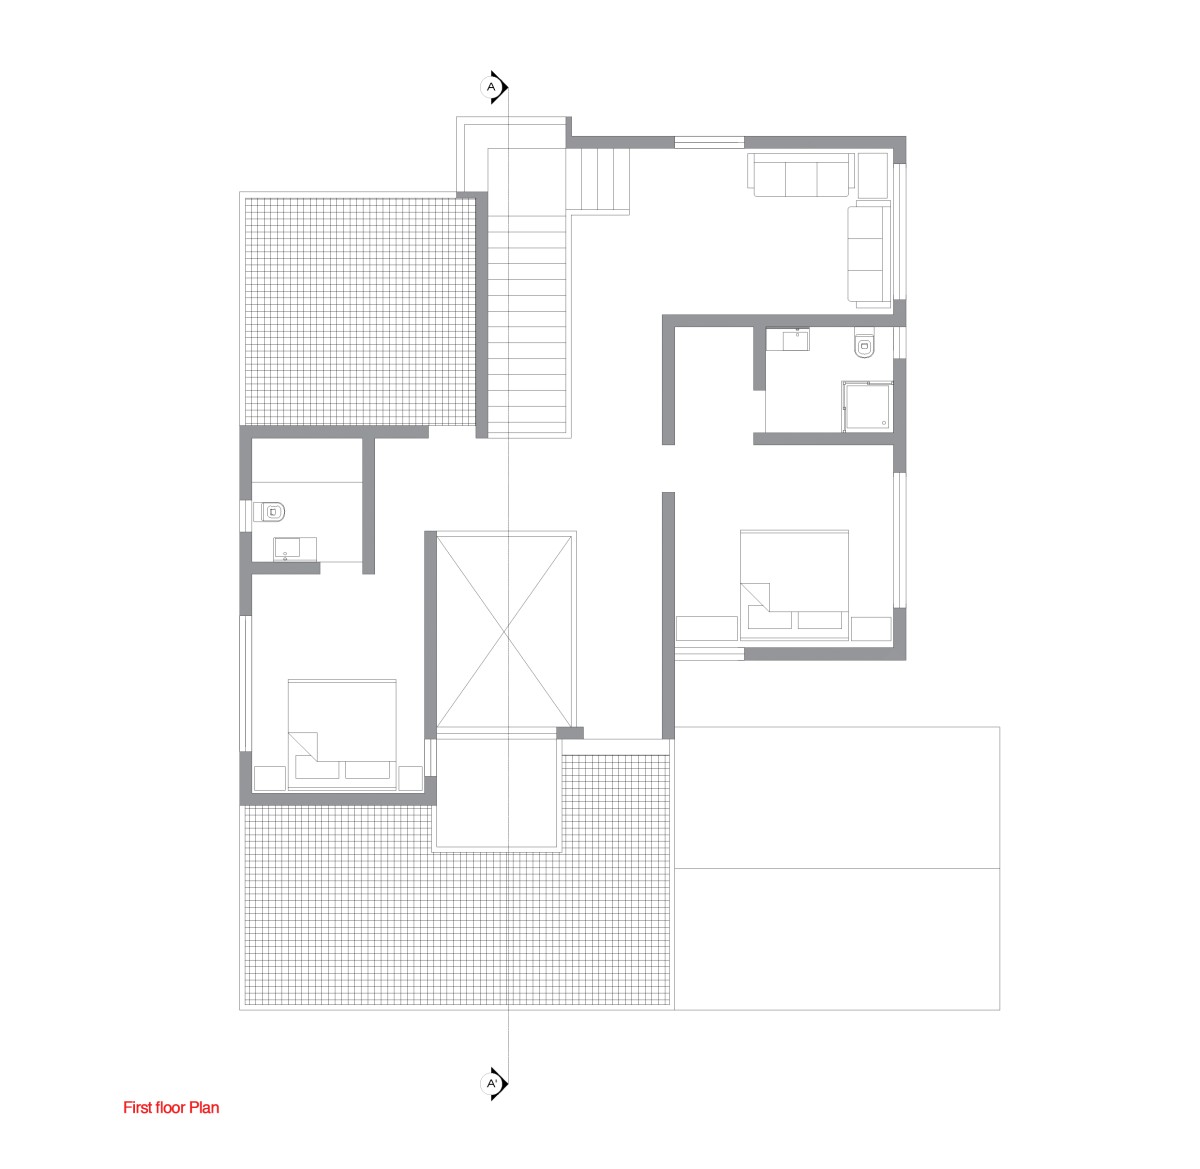 FIrst floor Plan of Swans House by Eleventh Floor Architects